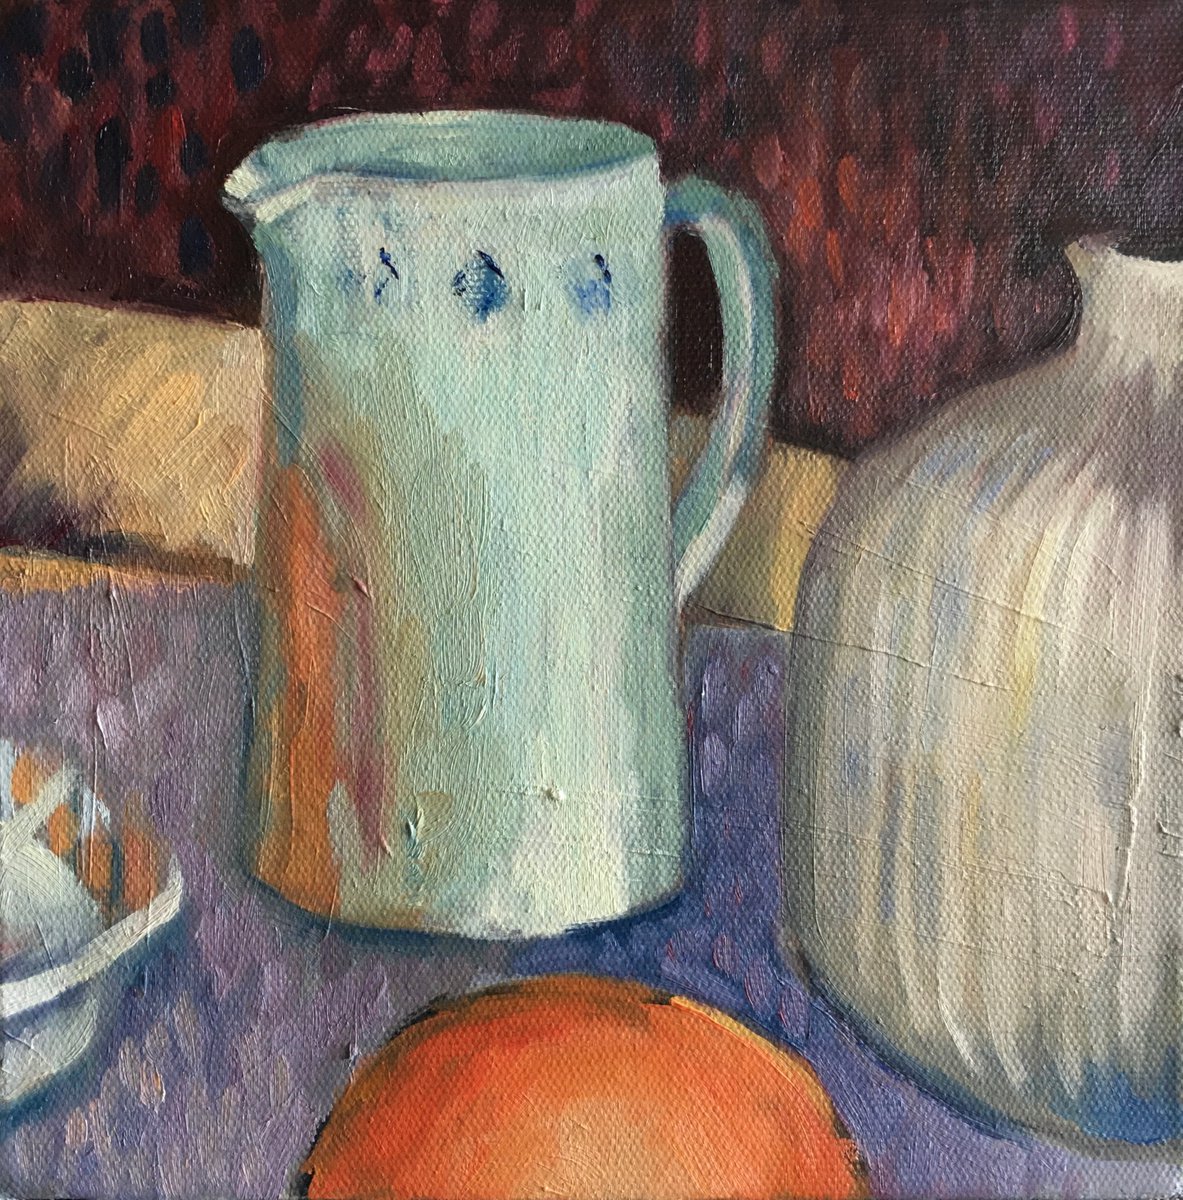 Still life with jug and bowl by Sheri Gee